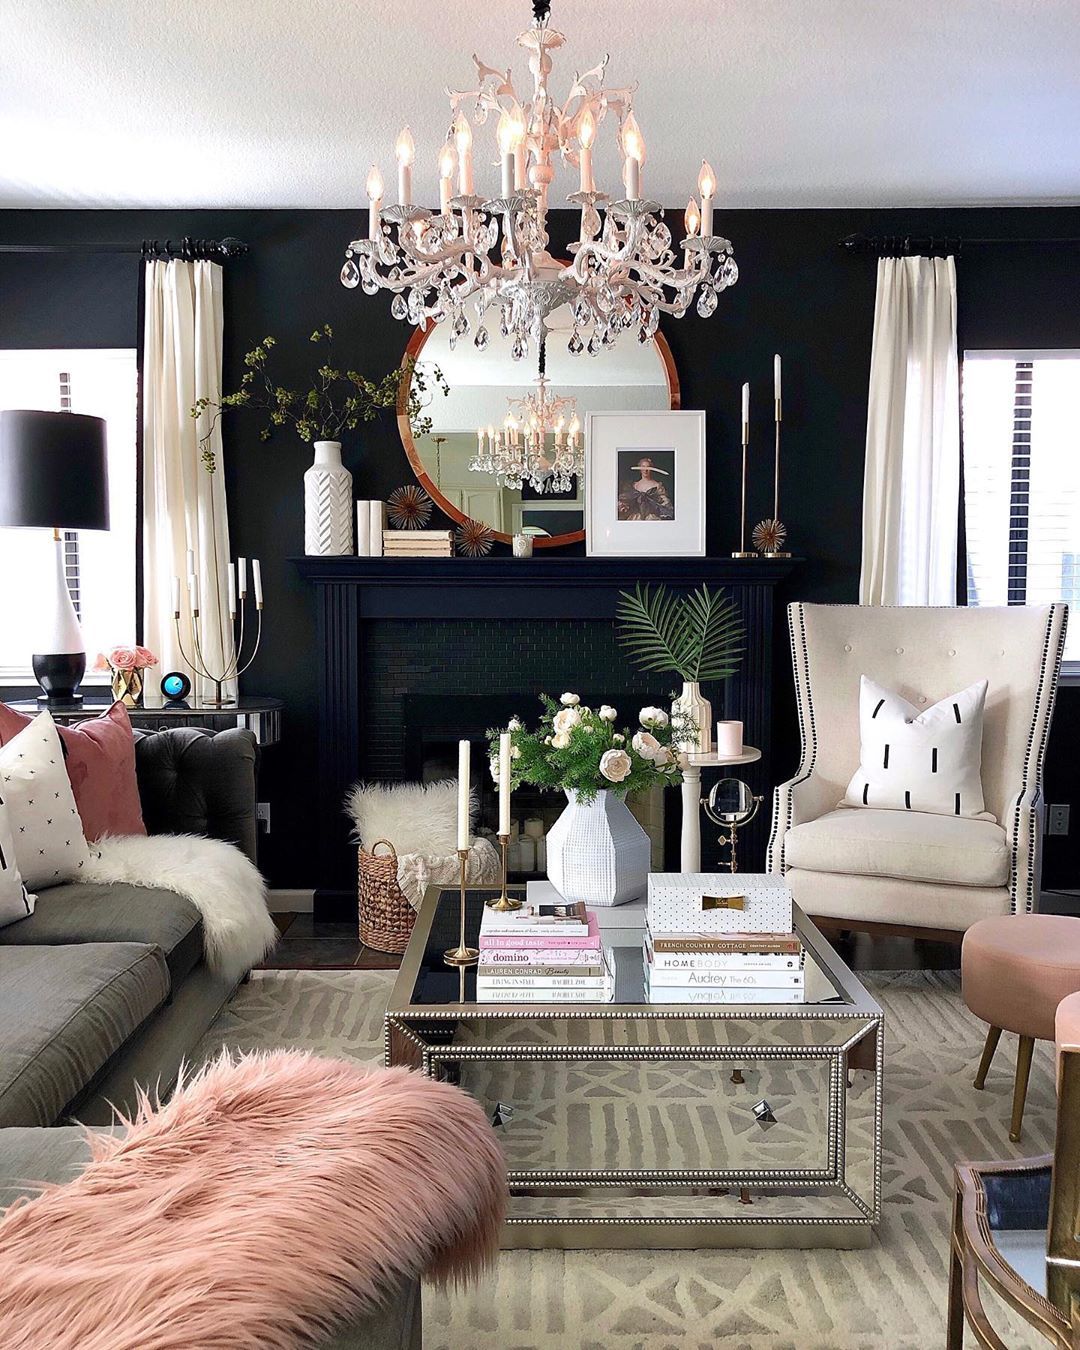 Glam Chandelier above mirrored coffee table in the Living Room via @homeandfabulous